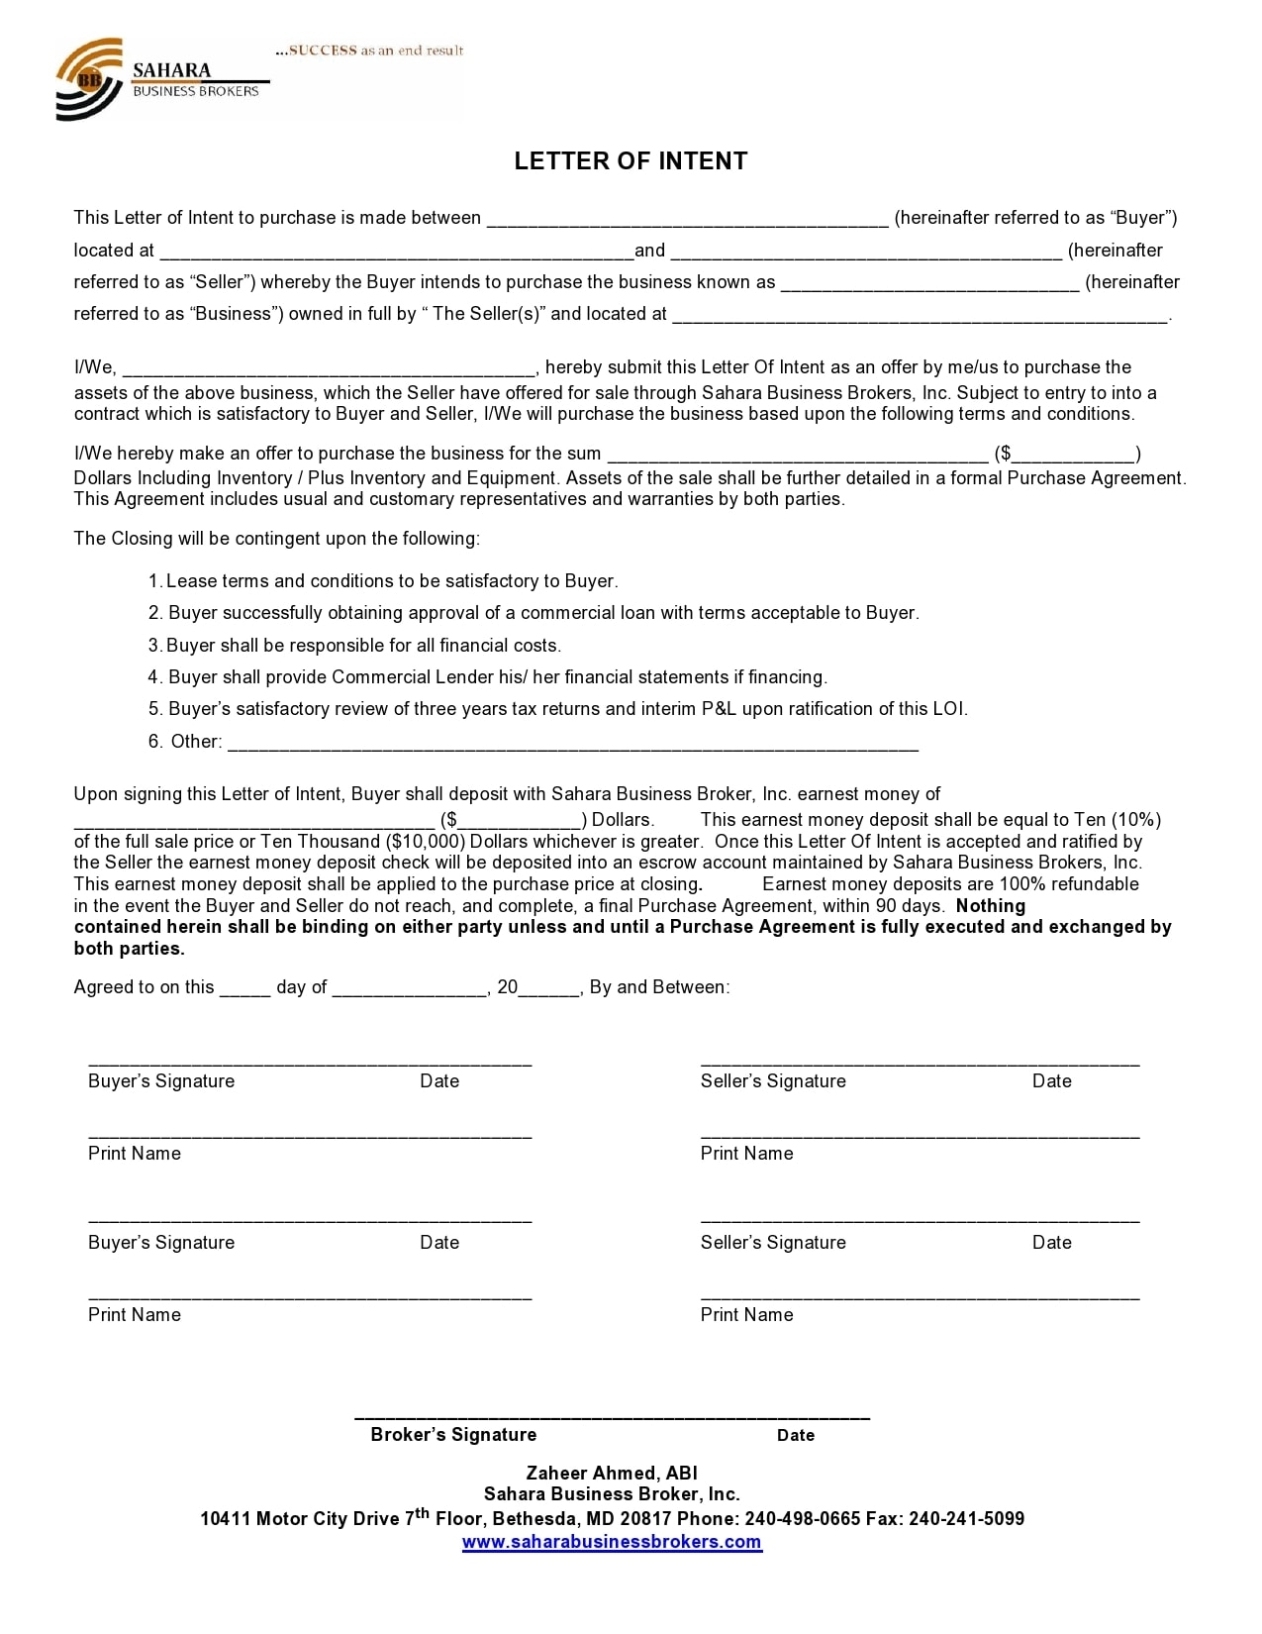 49 Free Letters Of Intent To Purchase (Real Estate/Business/Land) With Letter Of Intent For Real Estate Purchase Template